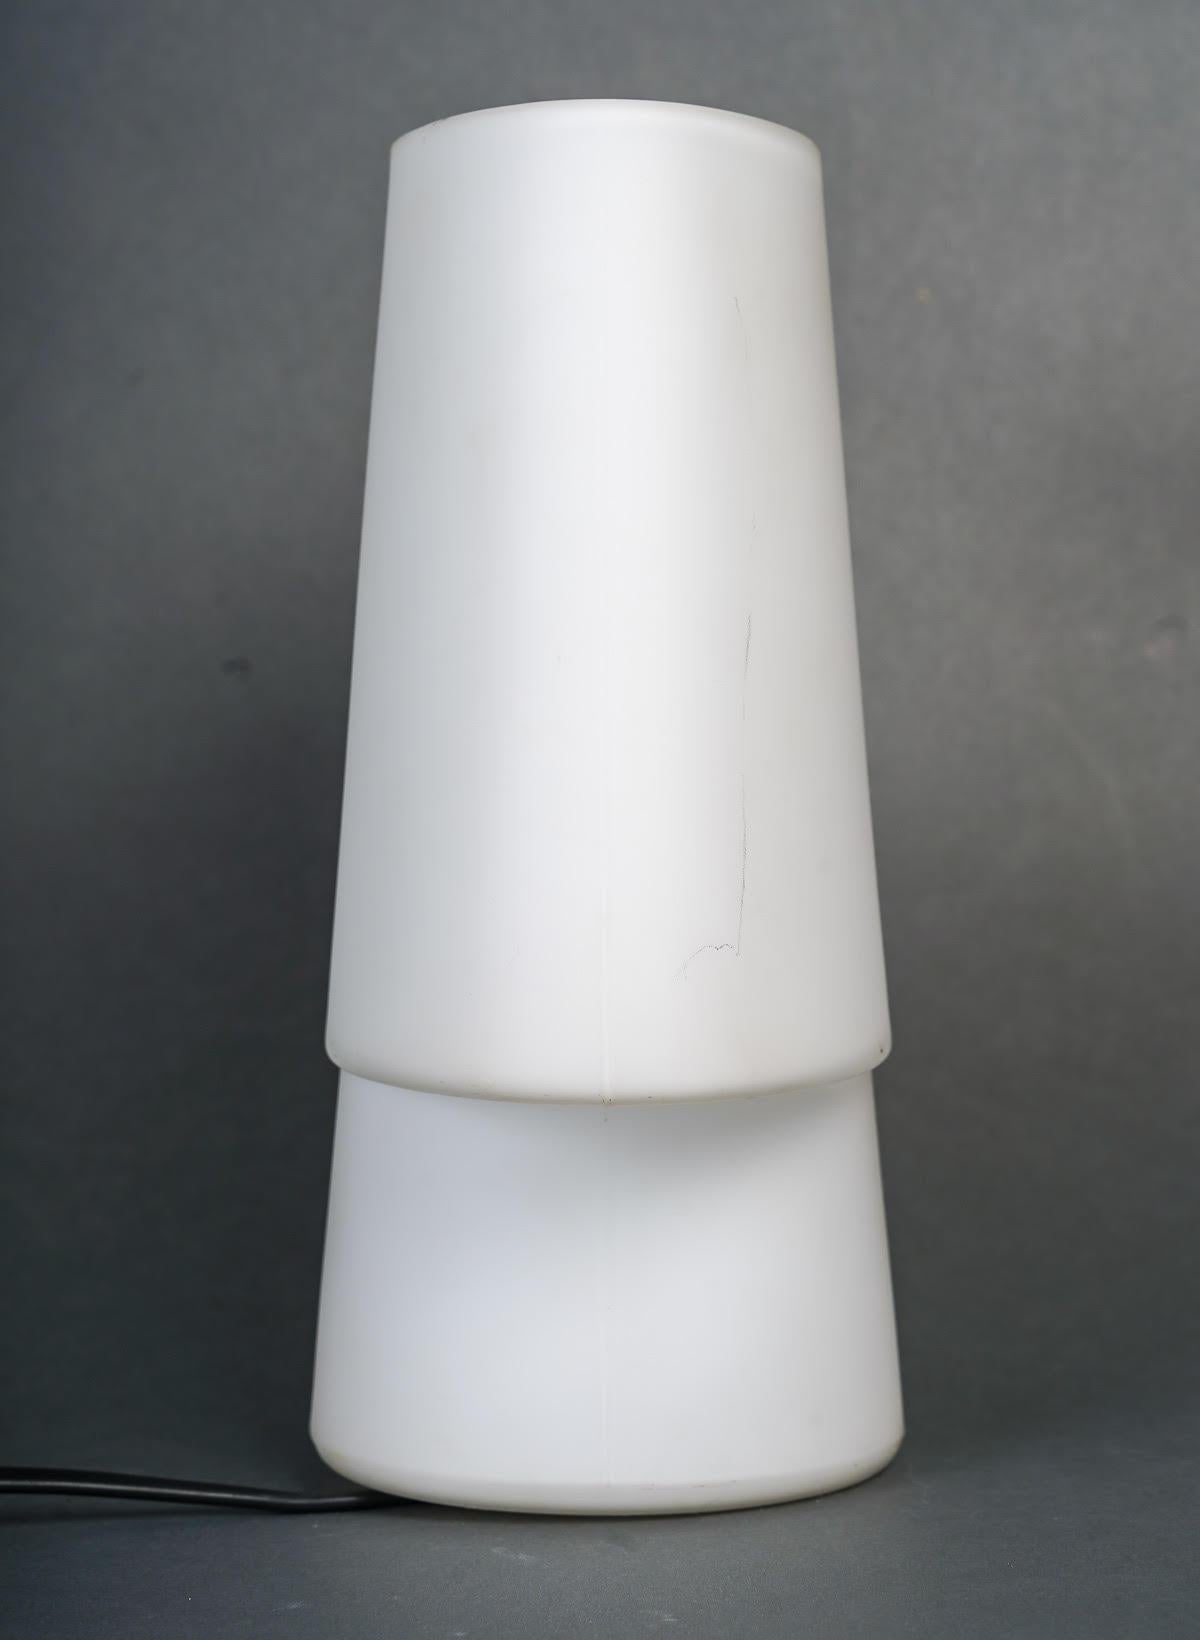 Modern Glass Lamp, 1990-2000.

Contemporary lamp from 1990-2000, 1 interior light.

Dimensions: h: 26cm, w: 21cm, d: 12cm.